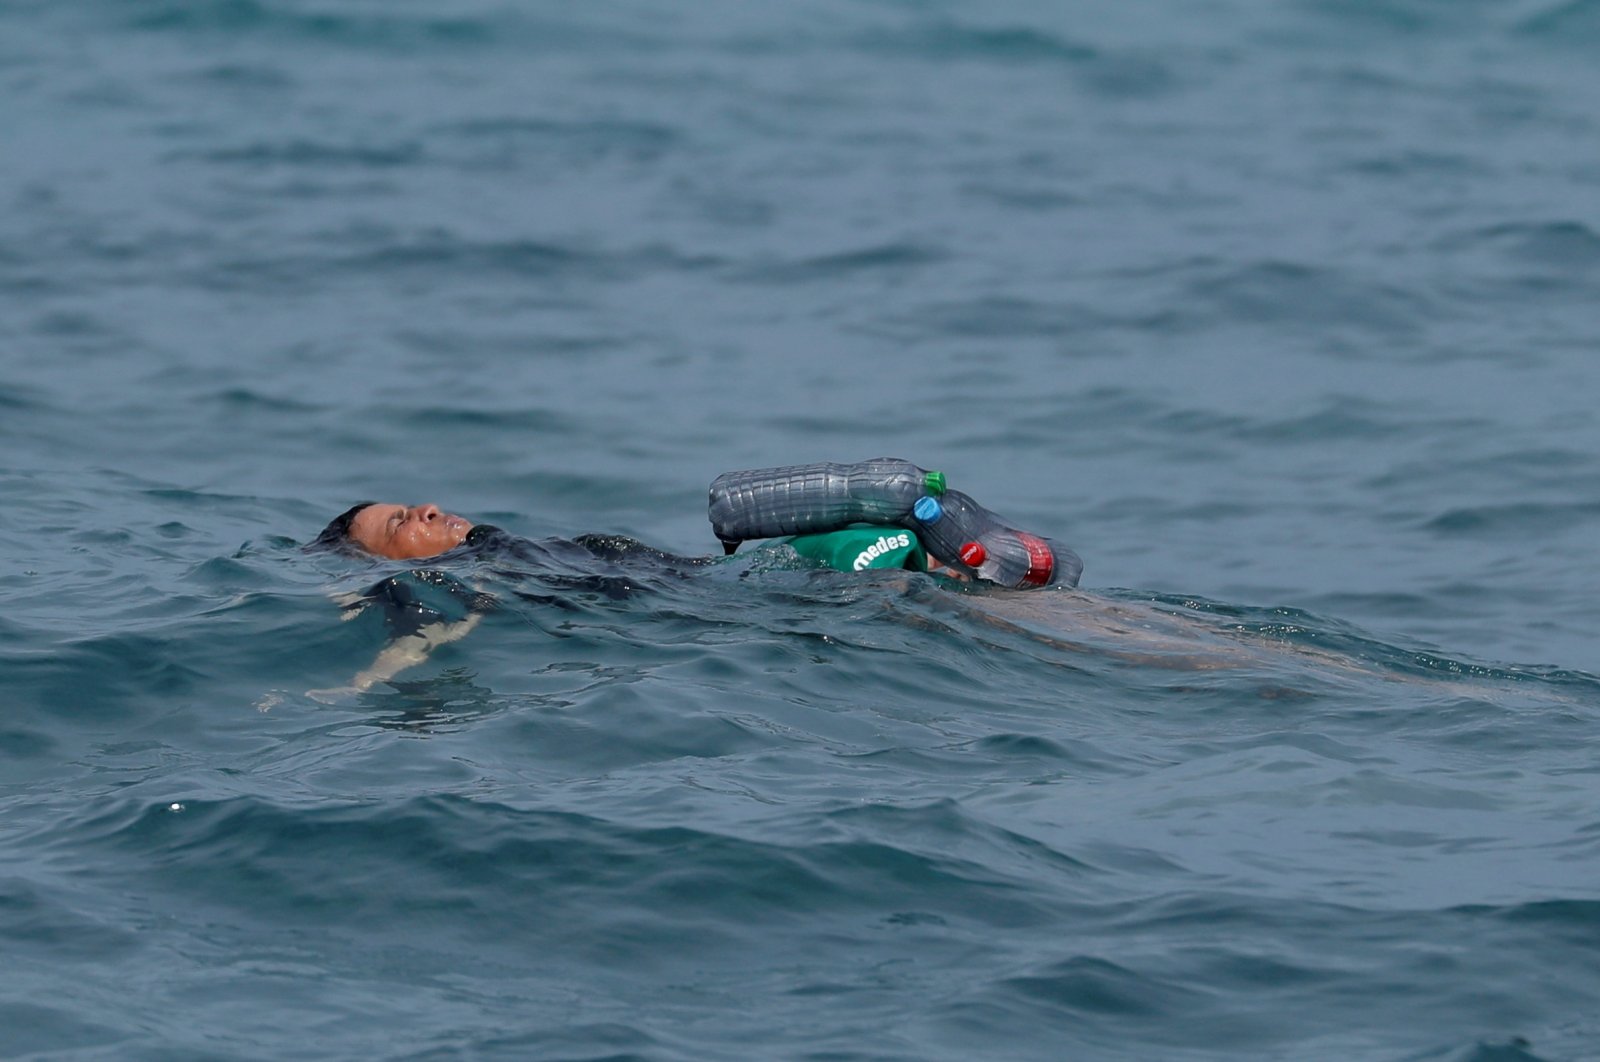 Moroccan boy who swam to Spain "preferred to die".